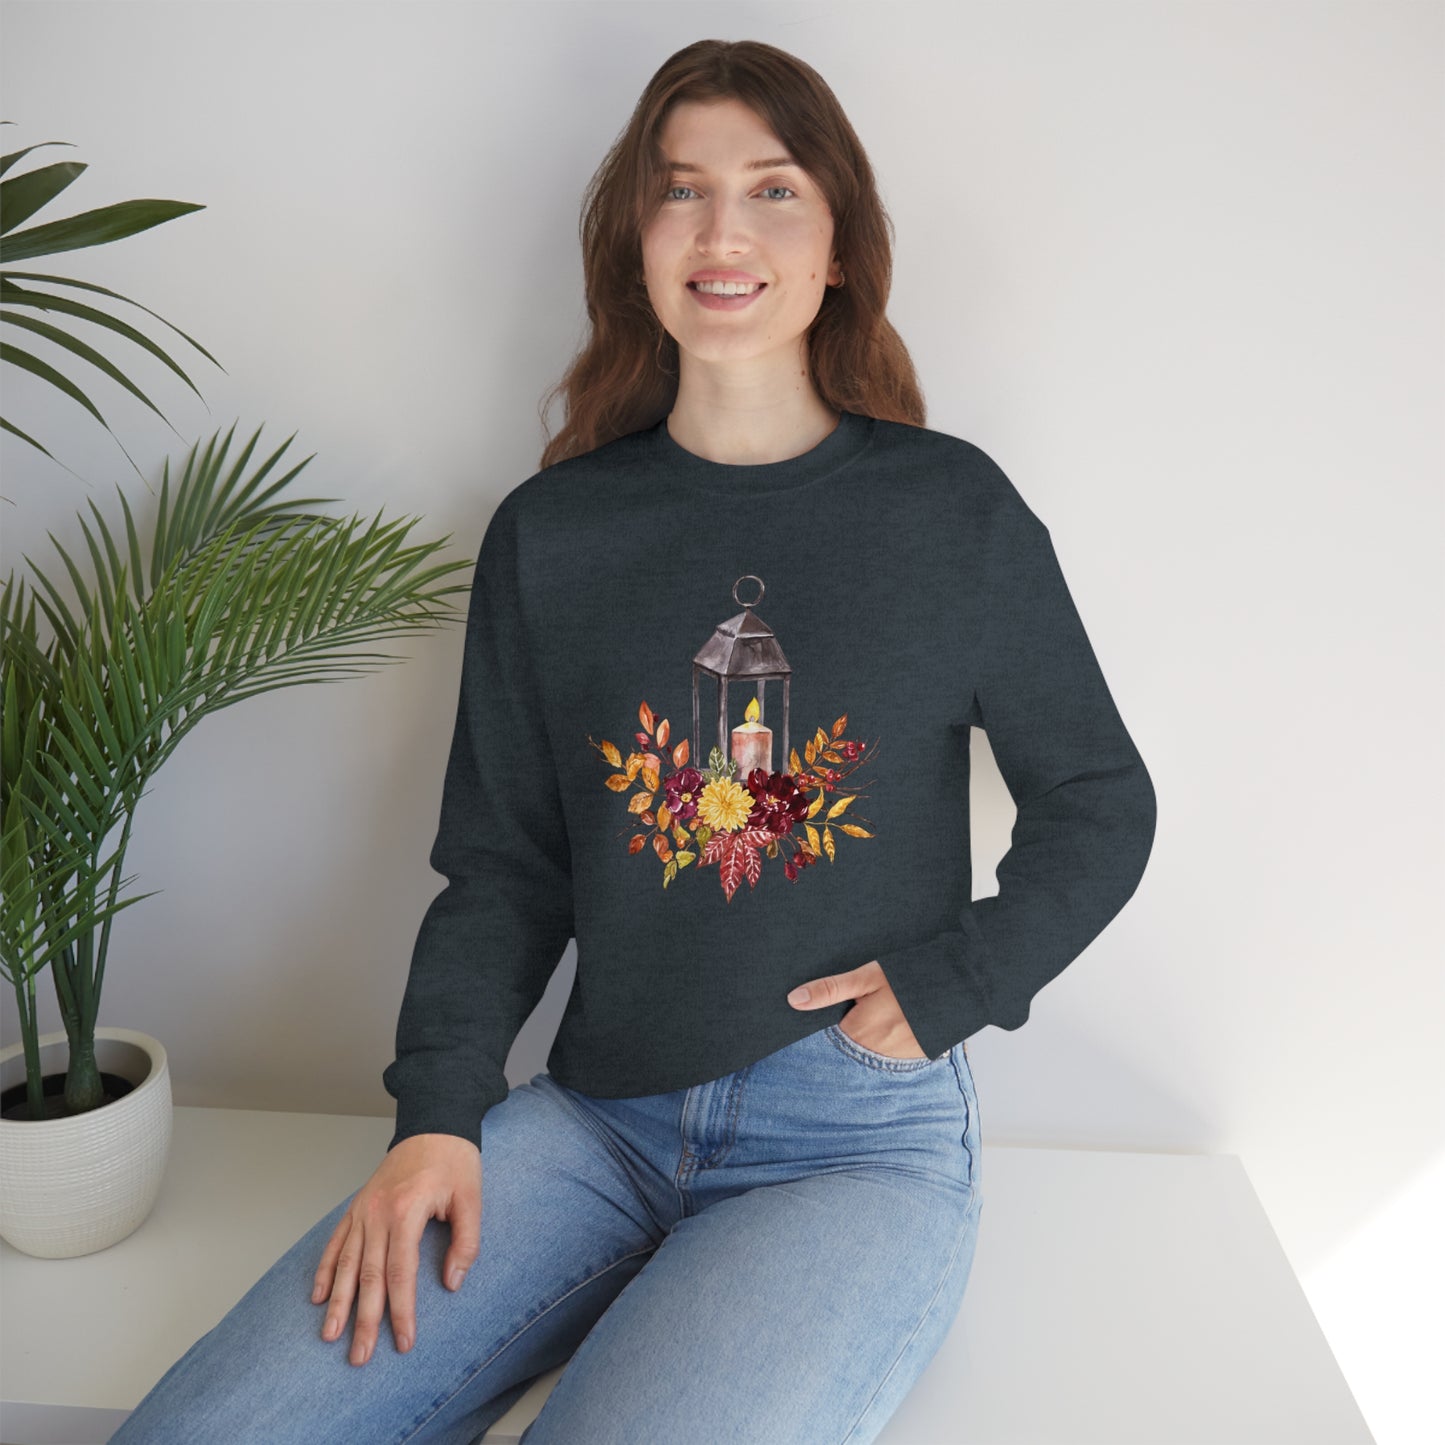 Mock up of a woman sitting on a surface while wearing the Dark Heather shirt